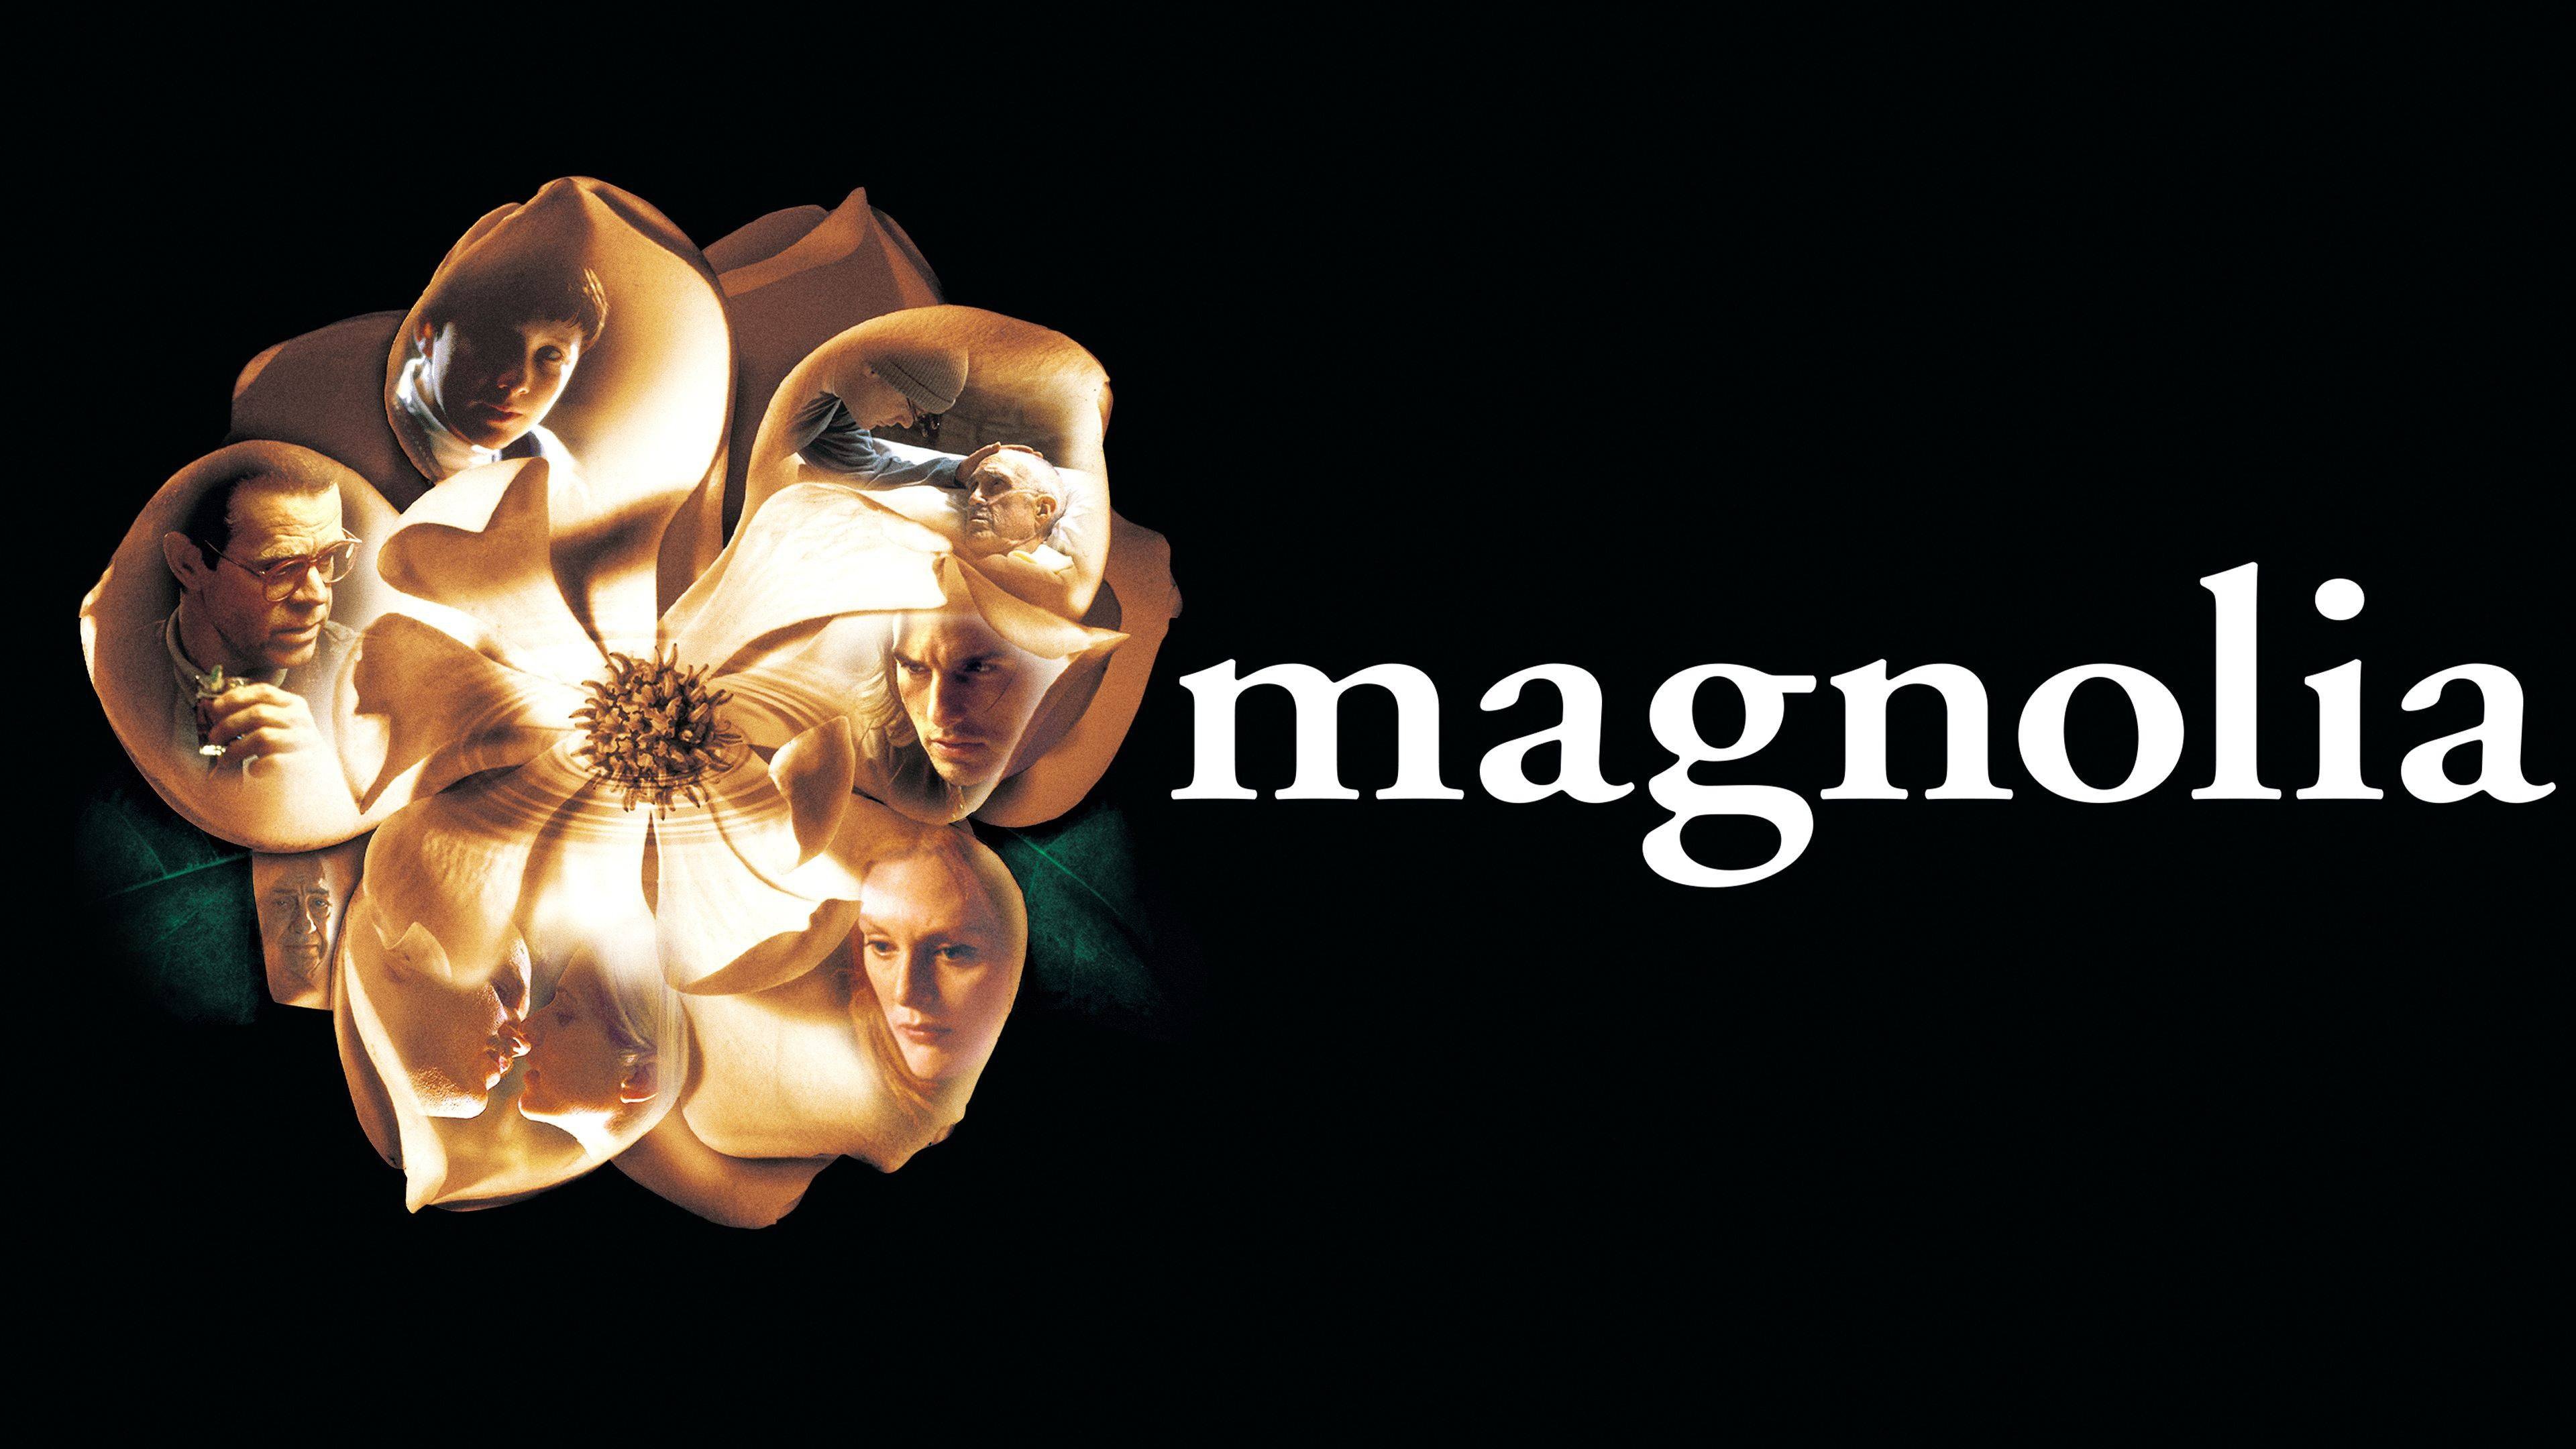 44-facts-about-the-movie-magnolia